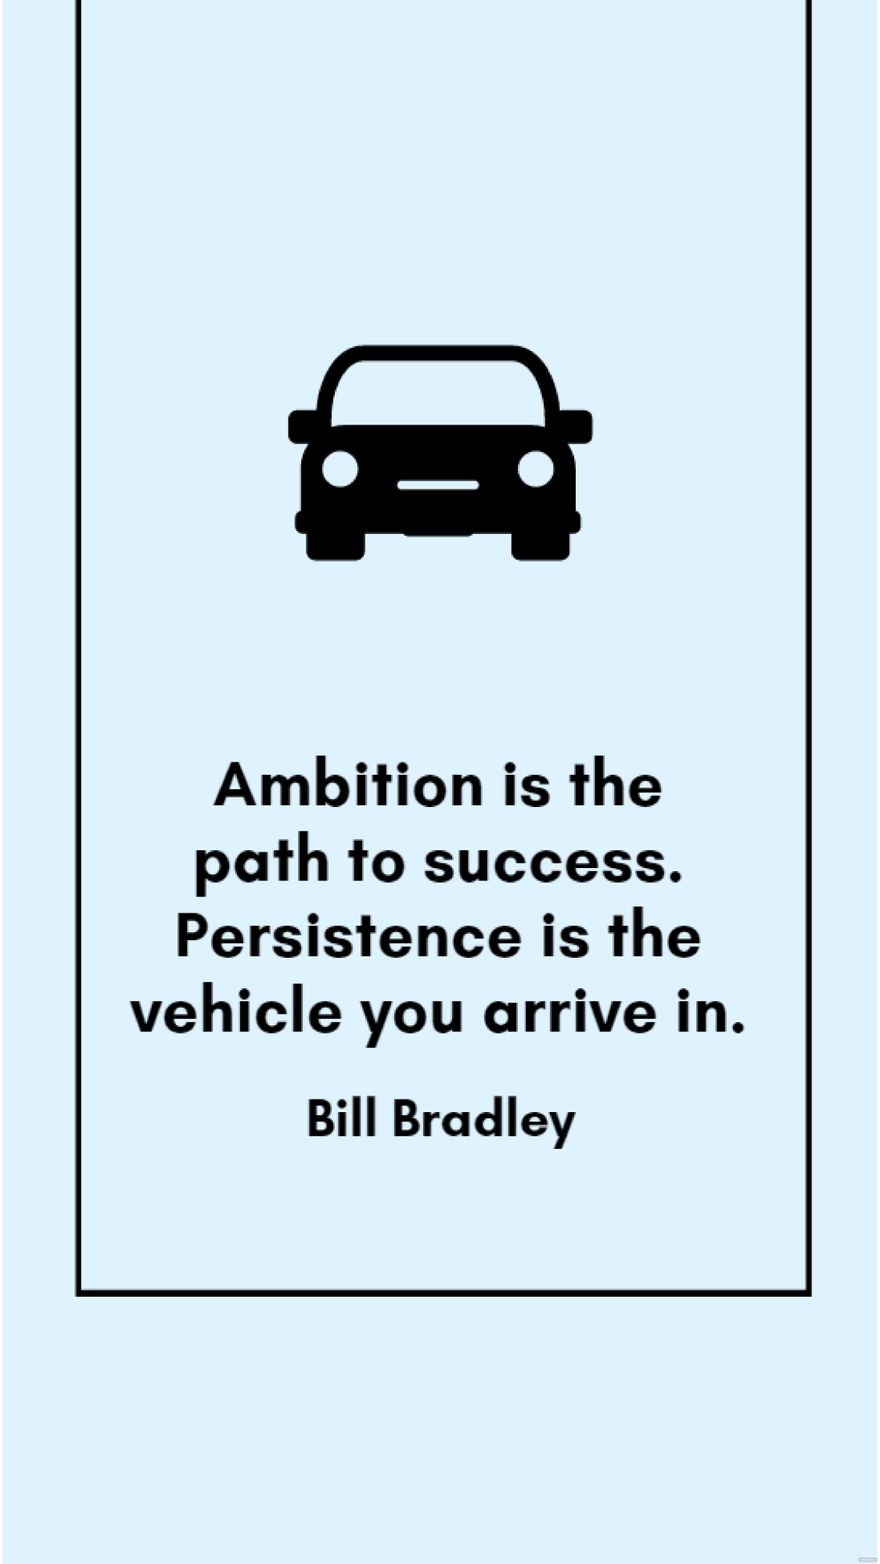 Free Bill Bradley - Ambition is the path to success. Persistence is the vehicle you arrive in.